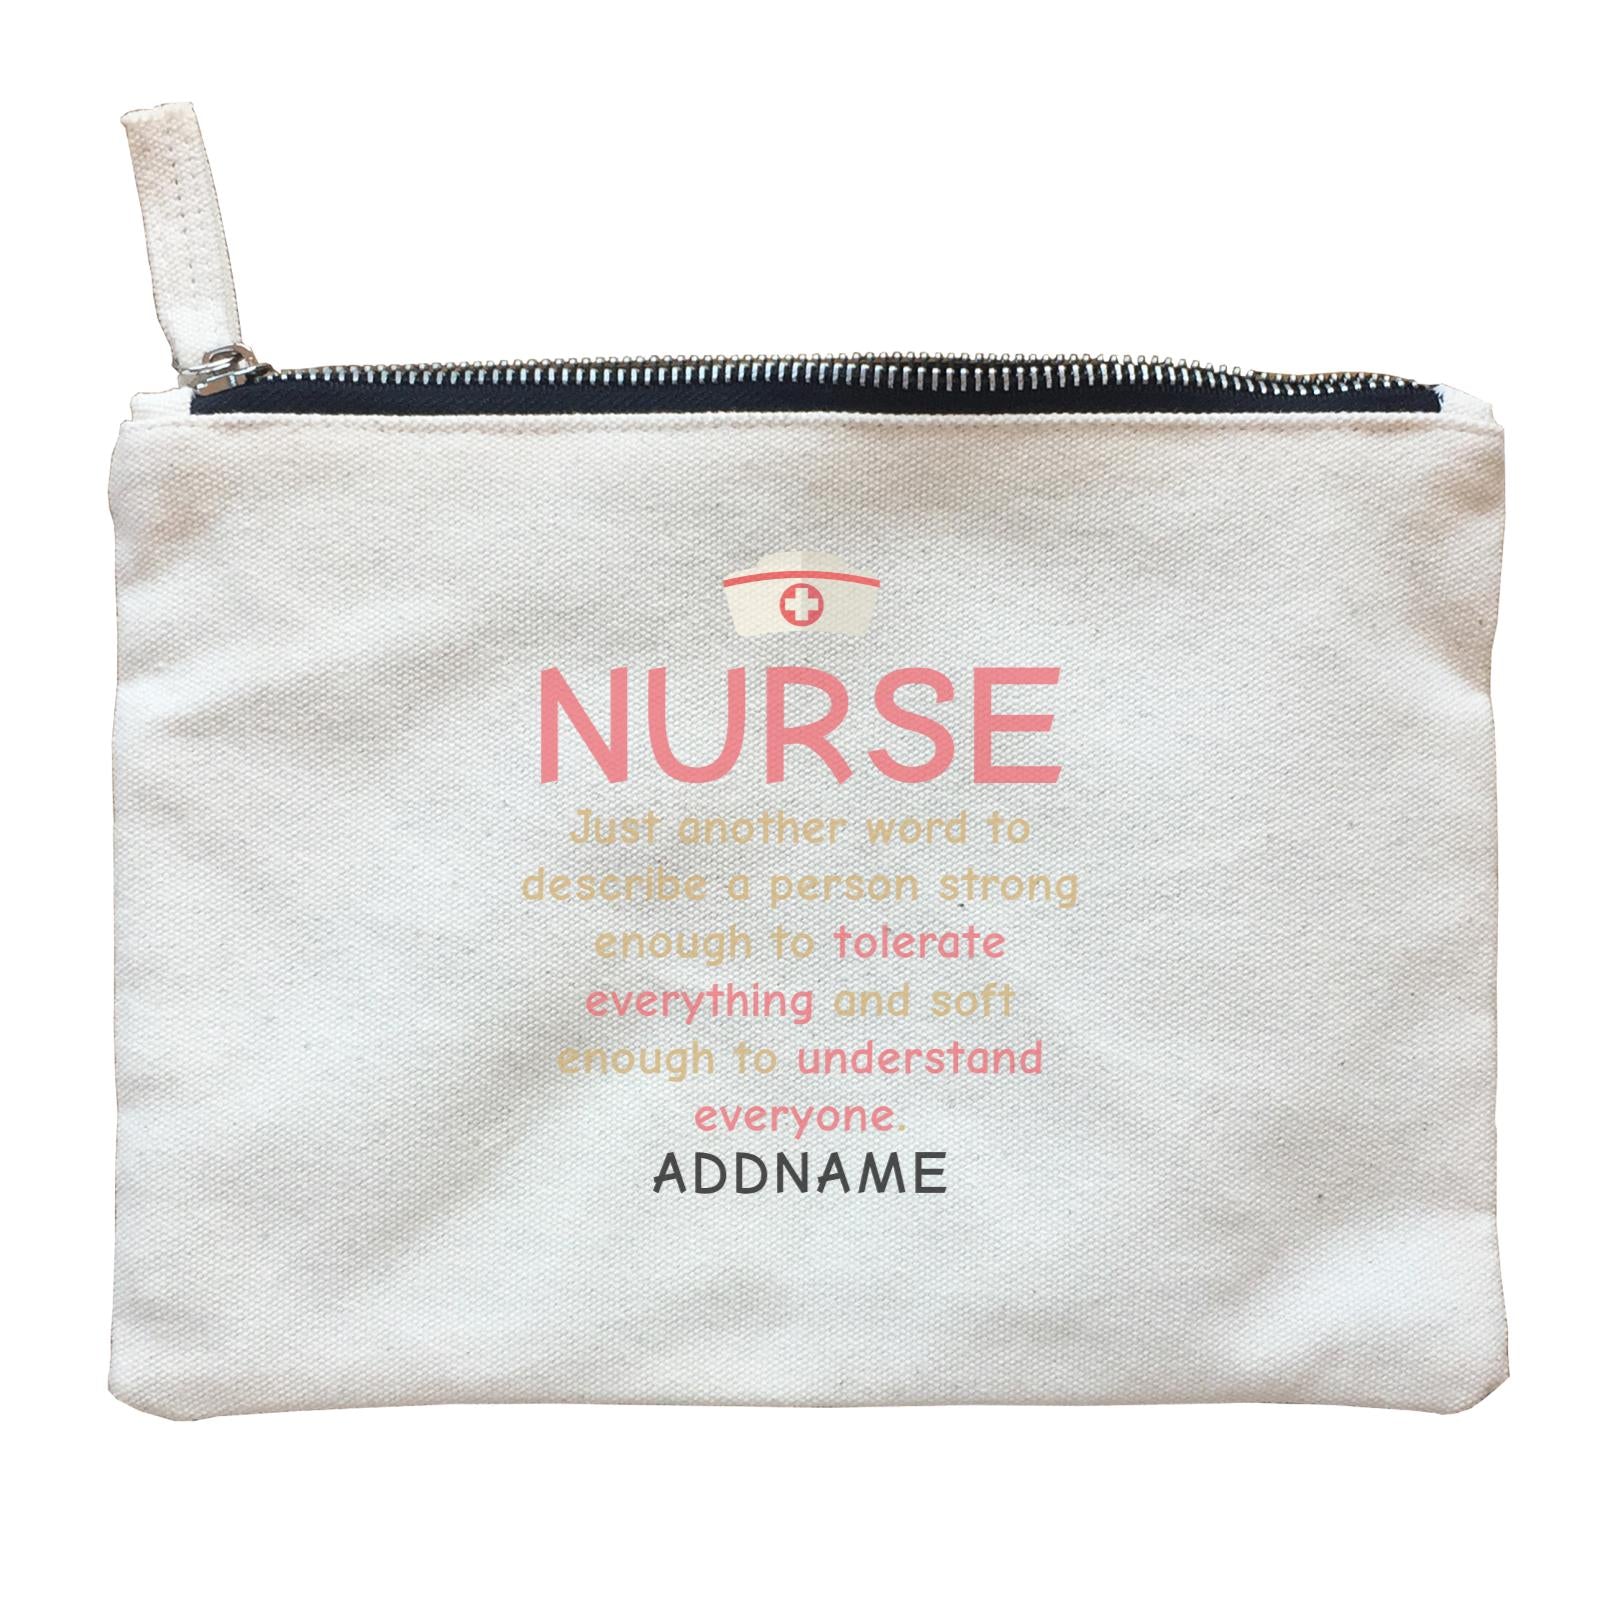 Nurse Quotes Just Another Word To Describe A Person Strong Addname Zipper Pouch